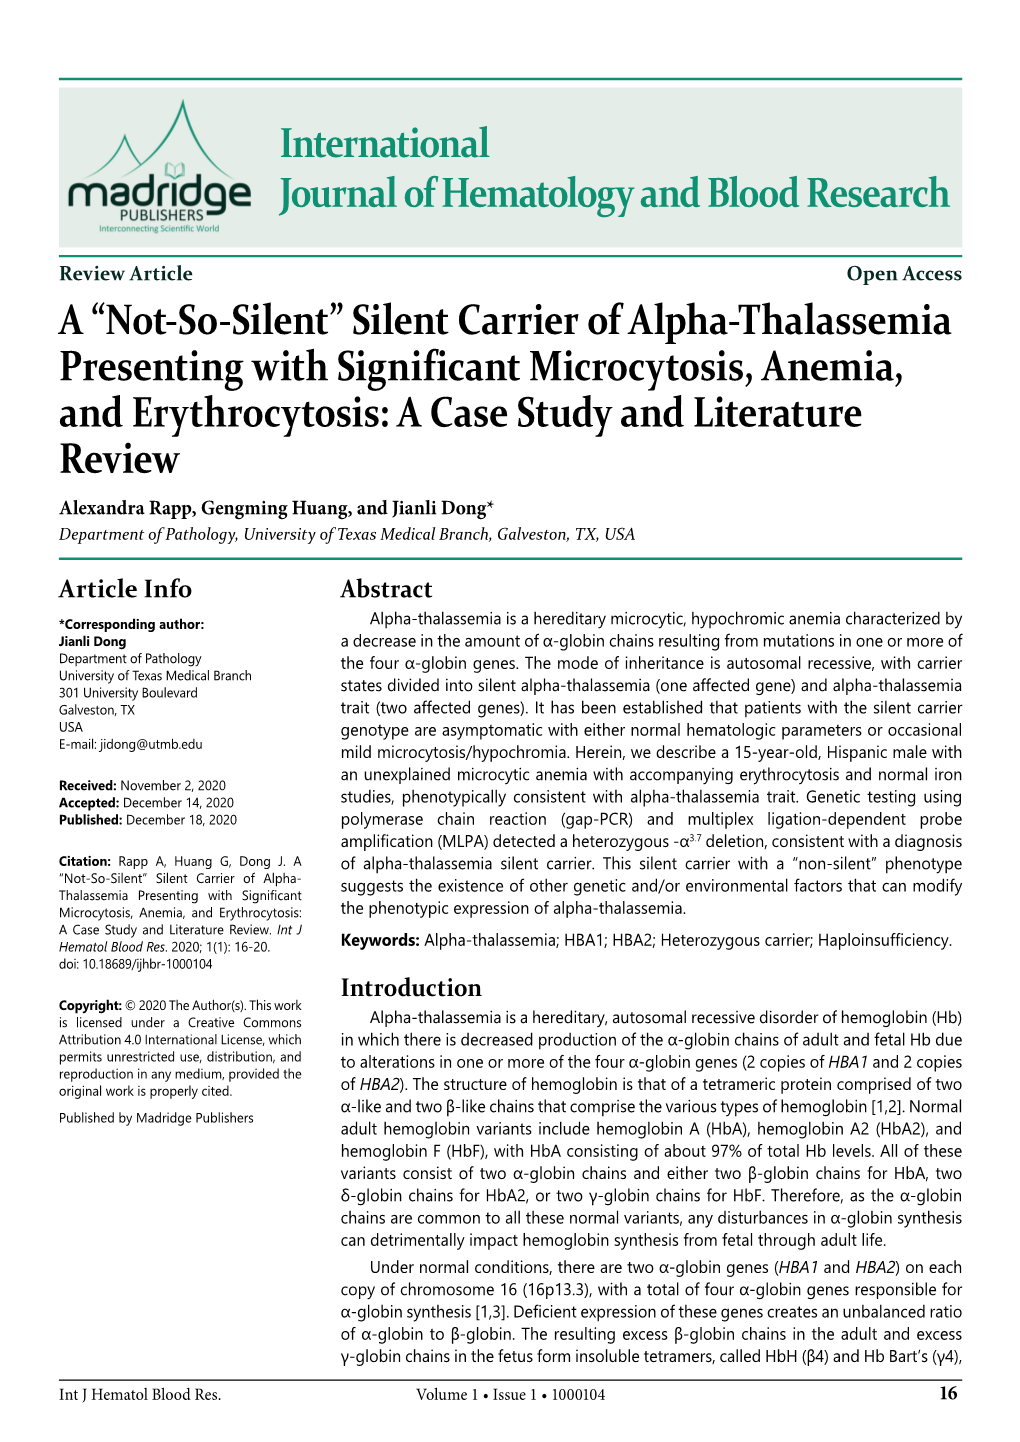 Silent Carrier of Alpha-Thalassemia Presenting with Significant